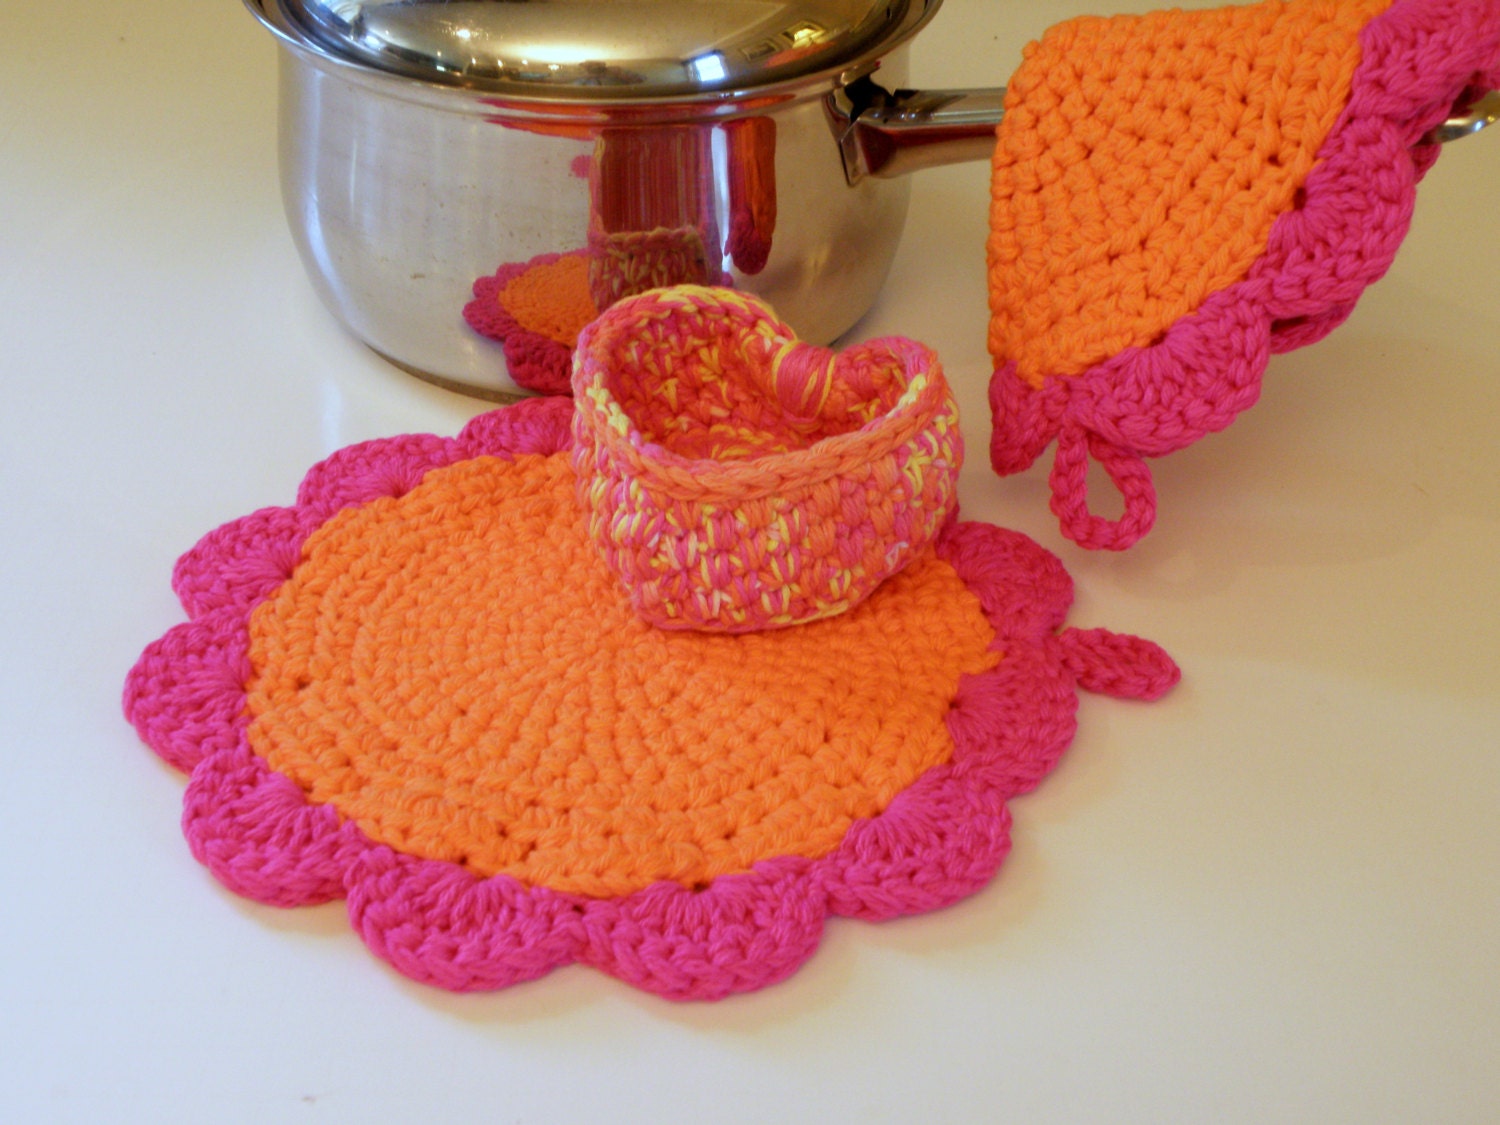 Large Crochet Potholders and Heart shaped Basket, Pot Holder Set with Ring storage basket in Cotton, Housewarming Gift in Orange and Pink - CottageCoveCrochet